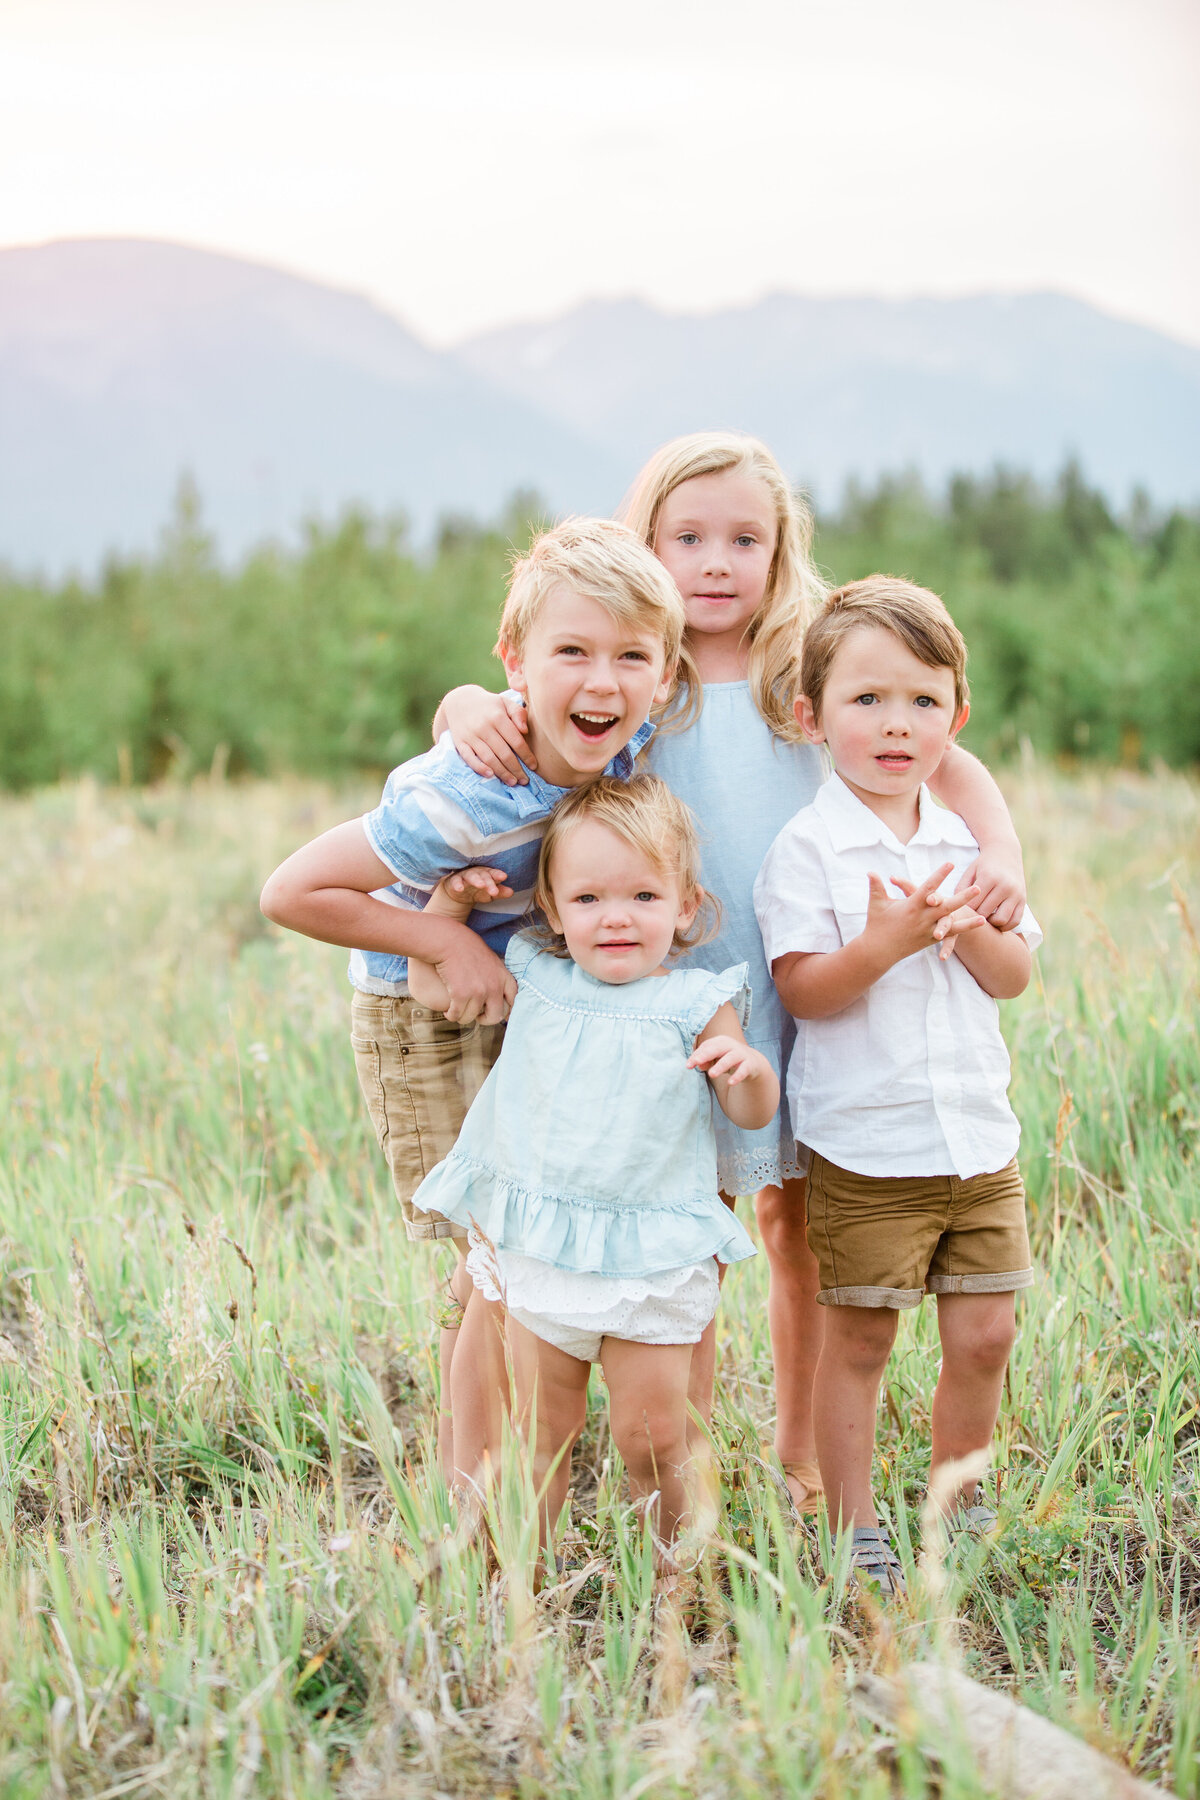 Four young siblings are all embraced in a hug. They are in a mountain meadow with high grasses